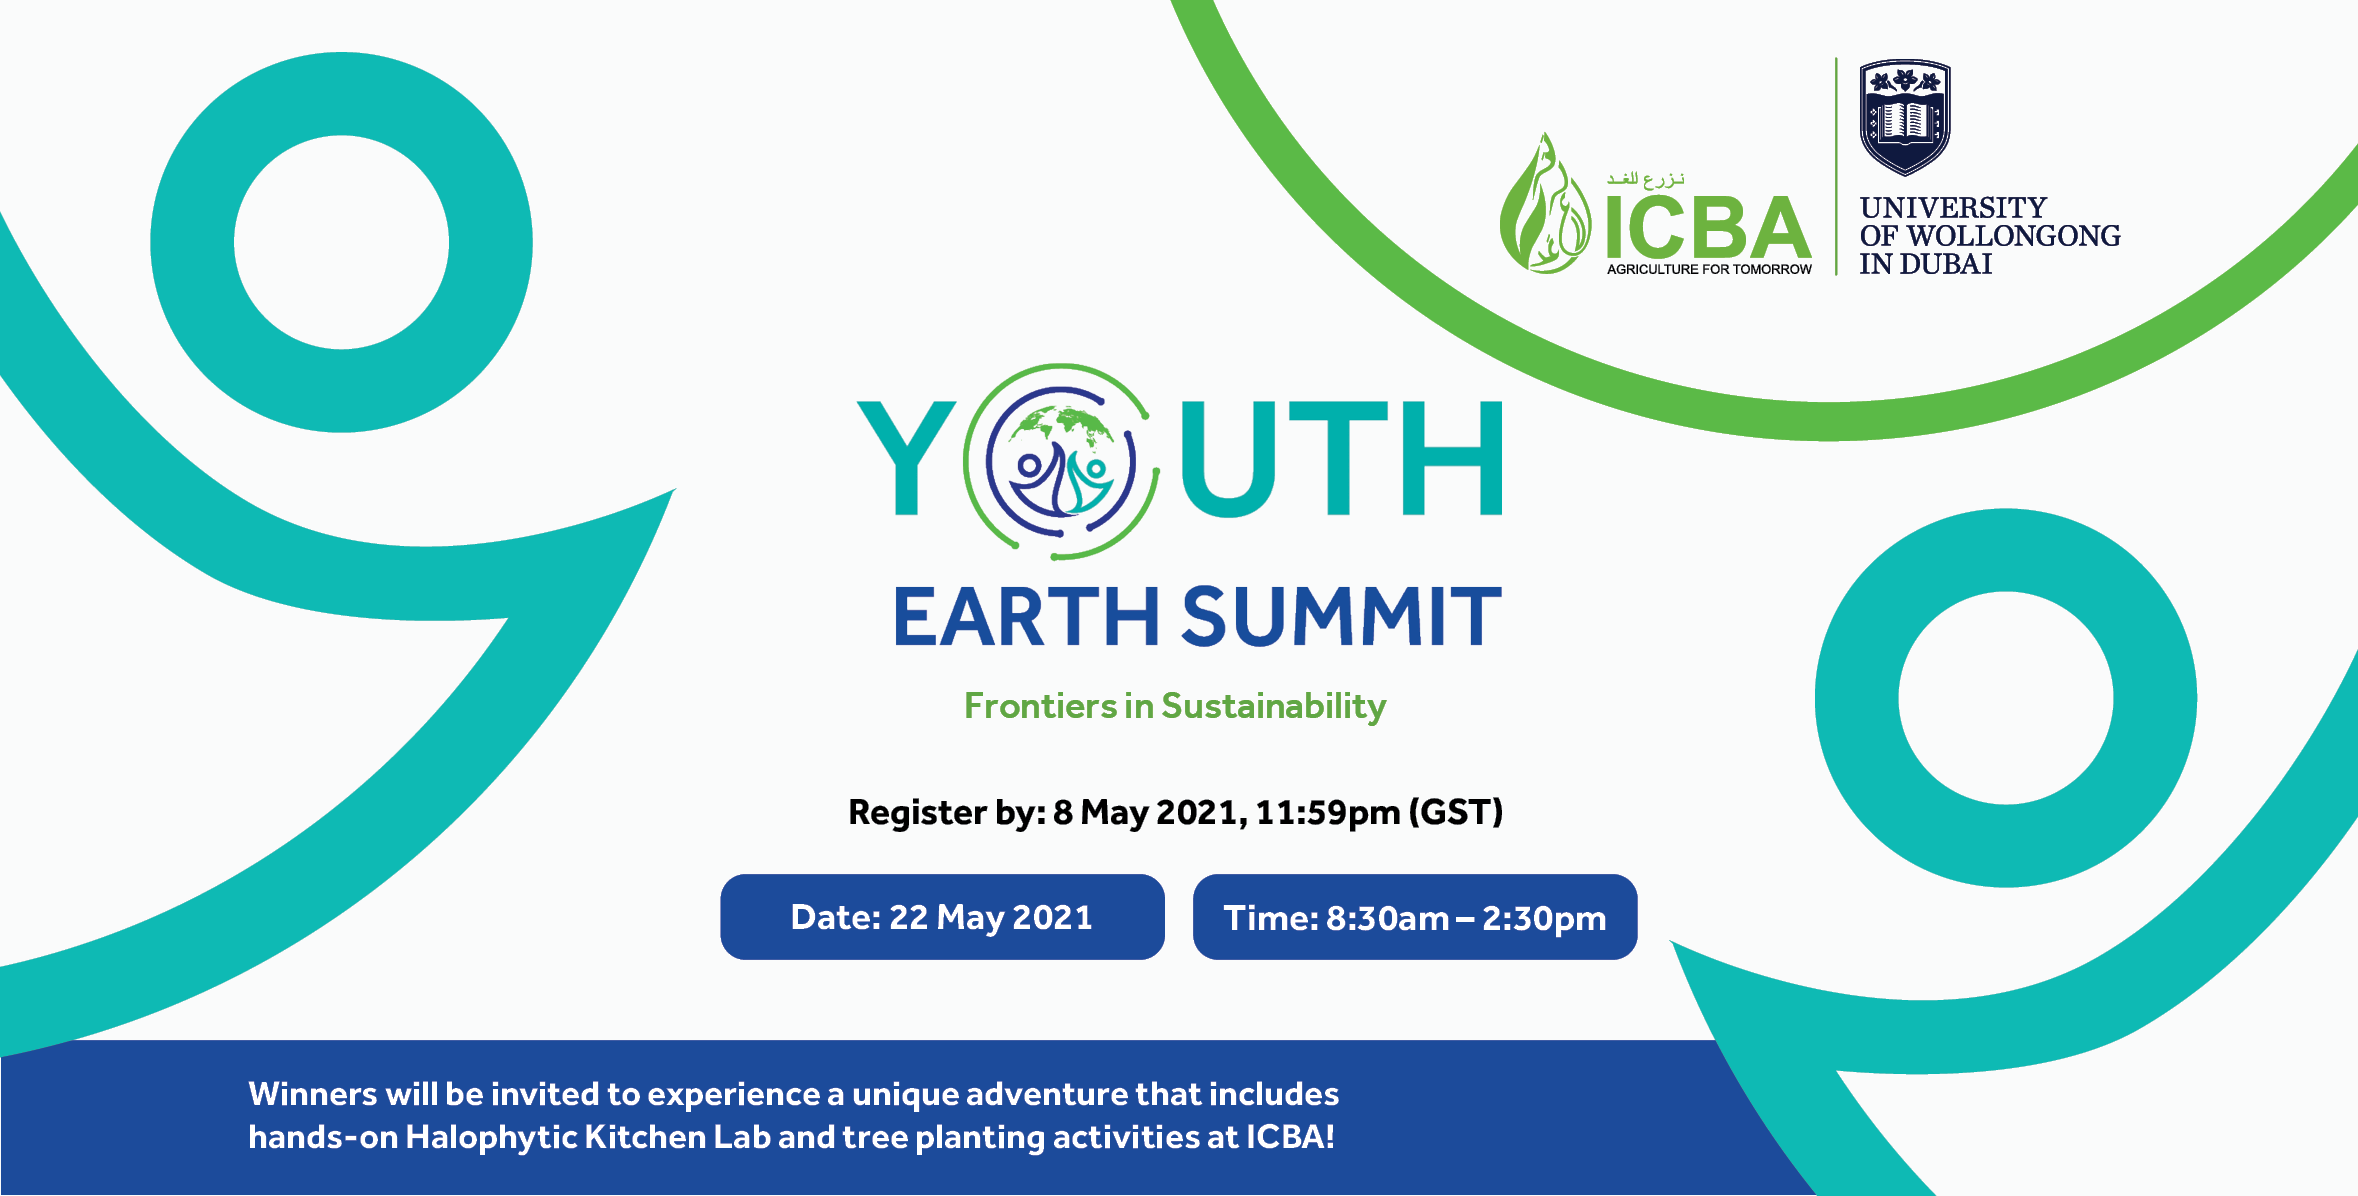 Youth Earth Summit 2021 (YES)